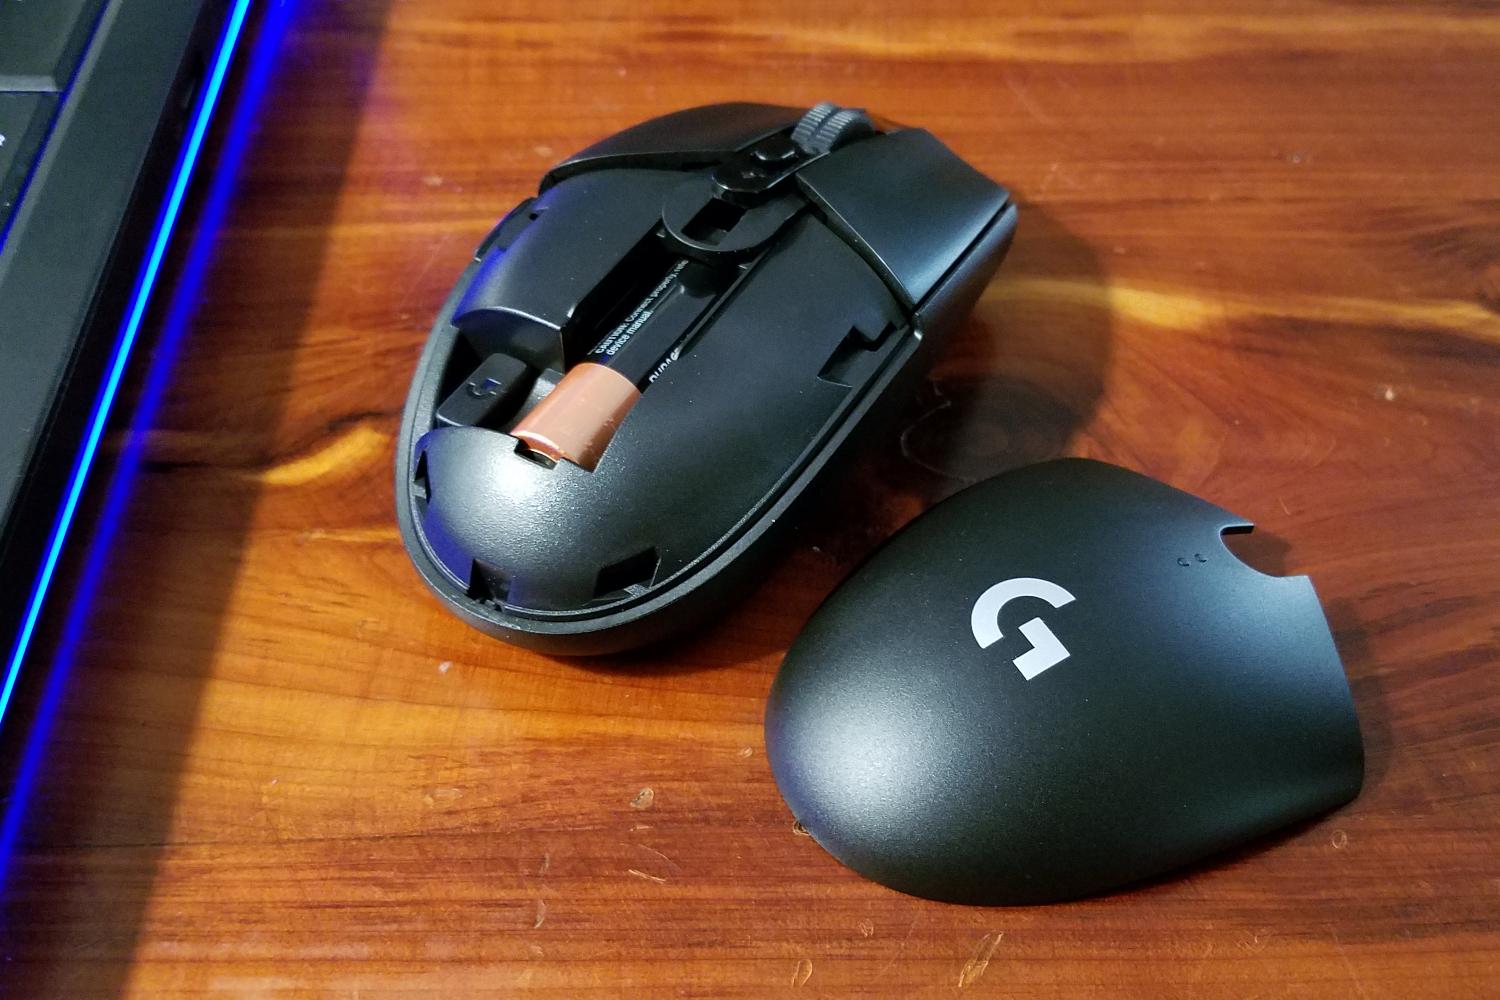 Logitech's New G305 Wireless Mouse Takes Pro Gaming Mainstream